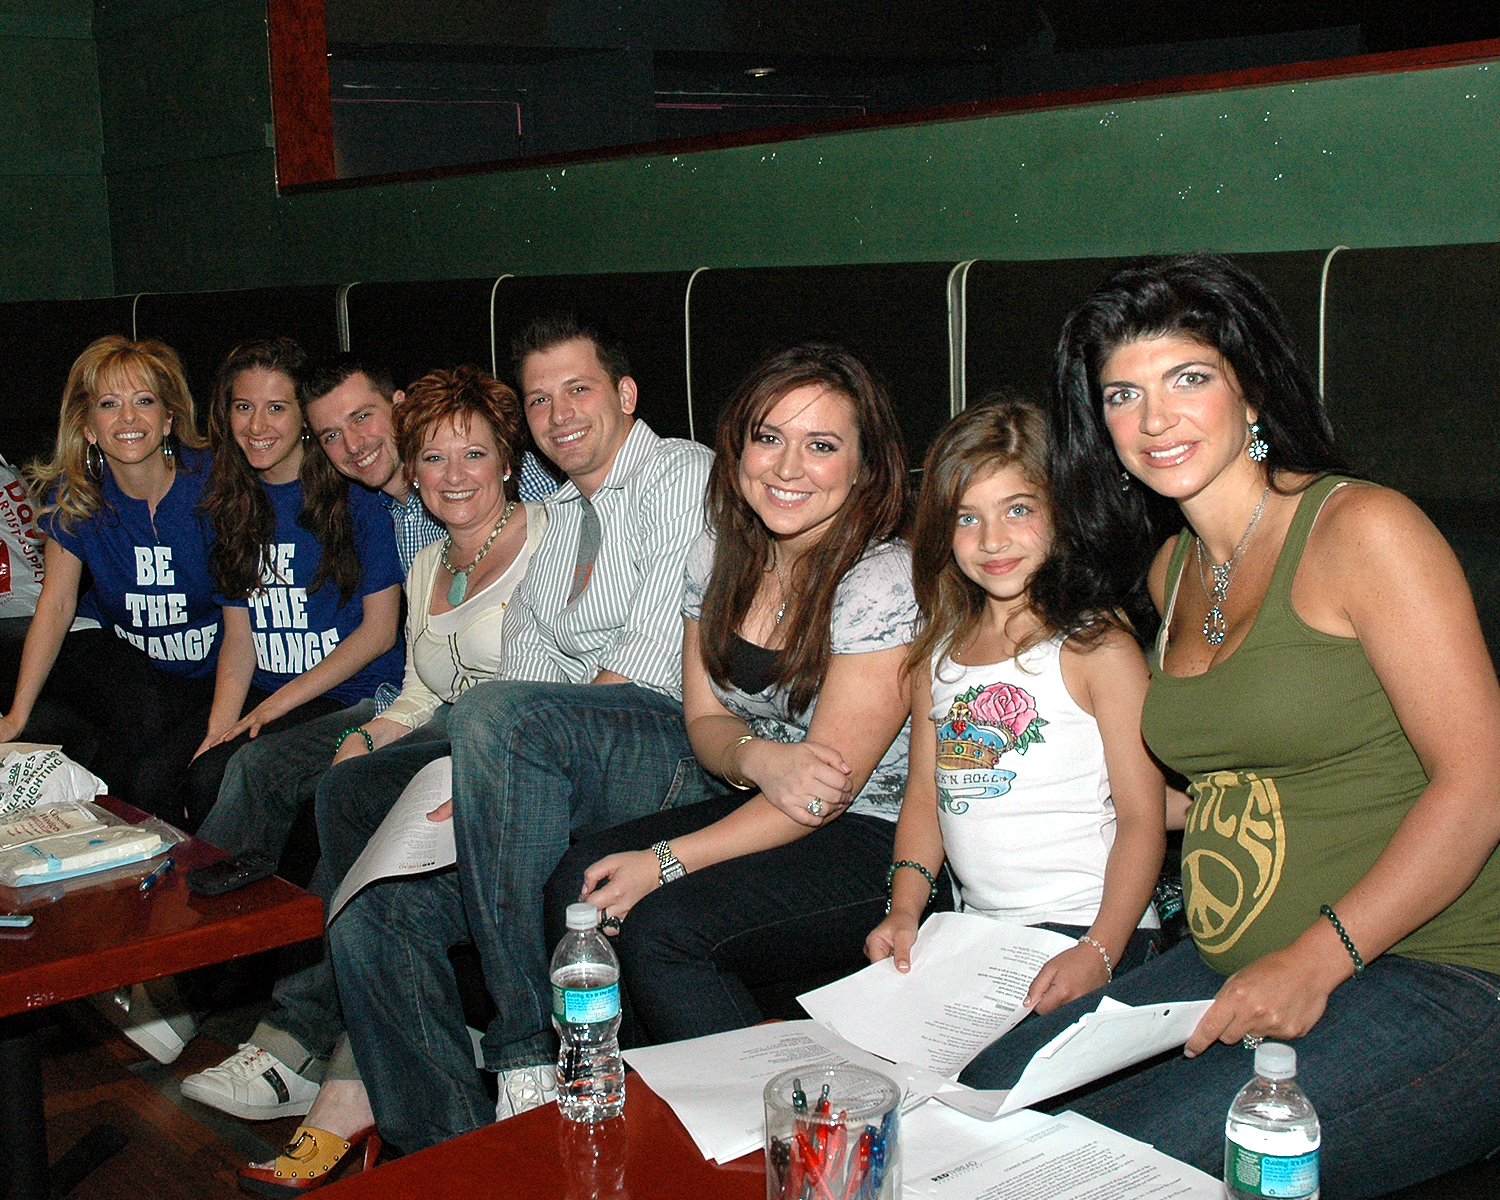 Dina Manzo, Caroline Manzo and Teresa Giudice of The Real Housewives of New Jersey with family